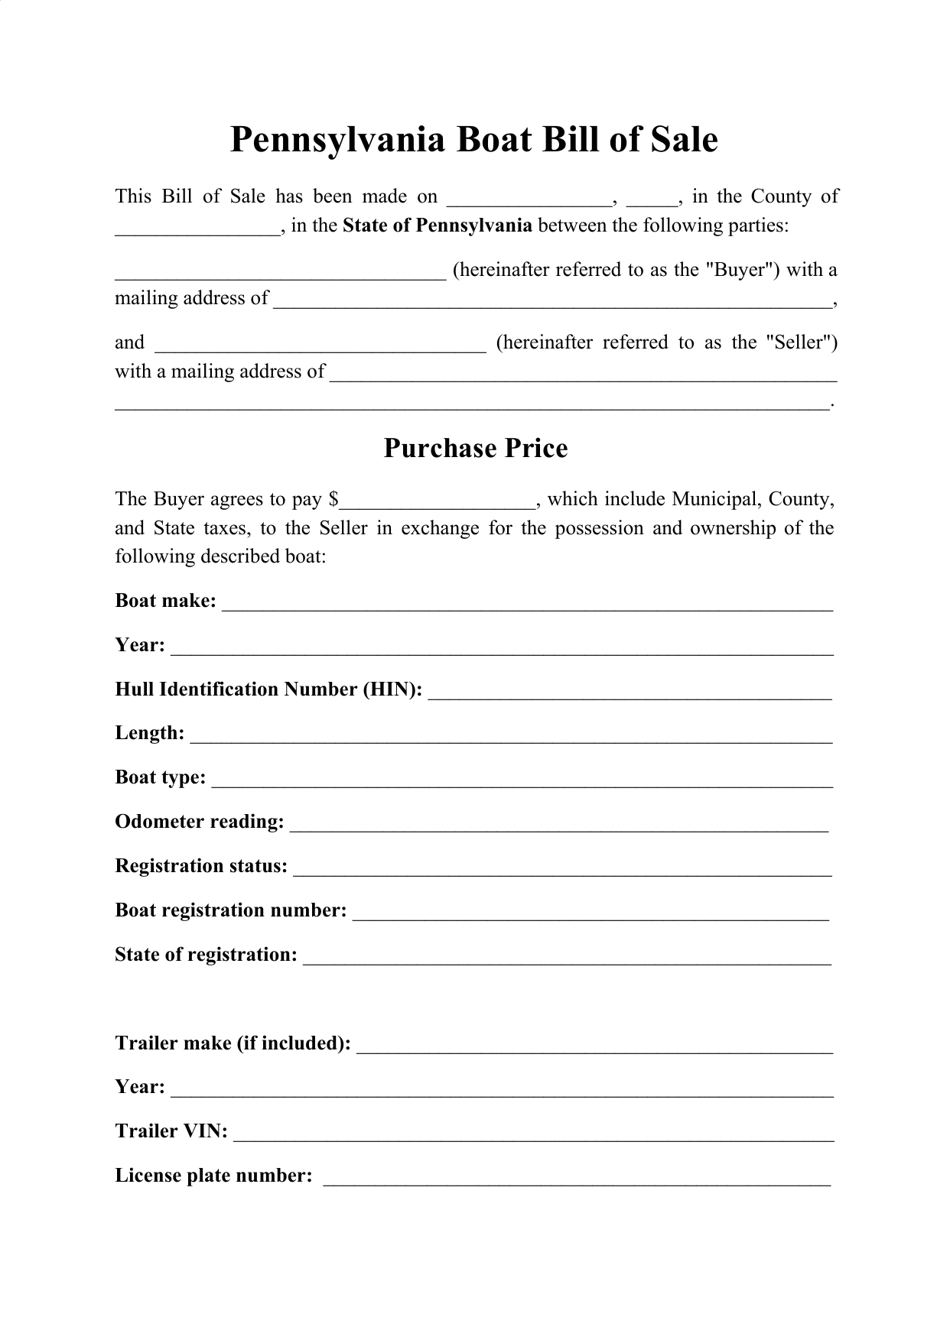 Boat Bill of Sale Form - Pennsylvania, Page 1